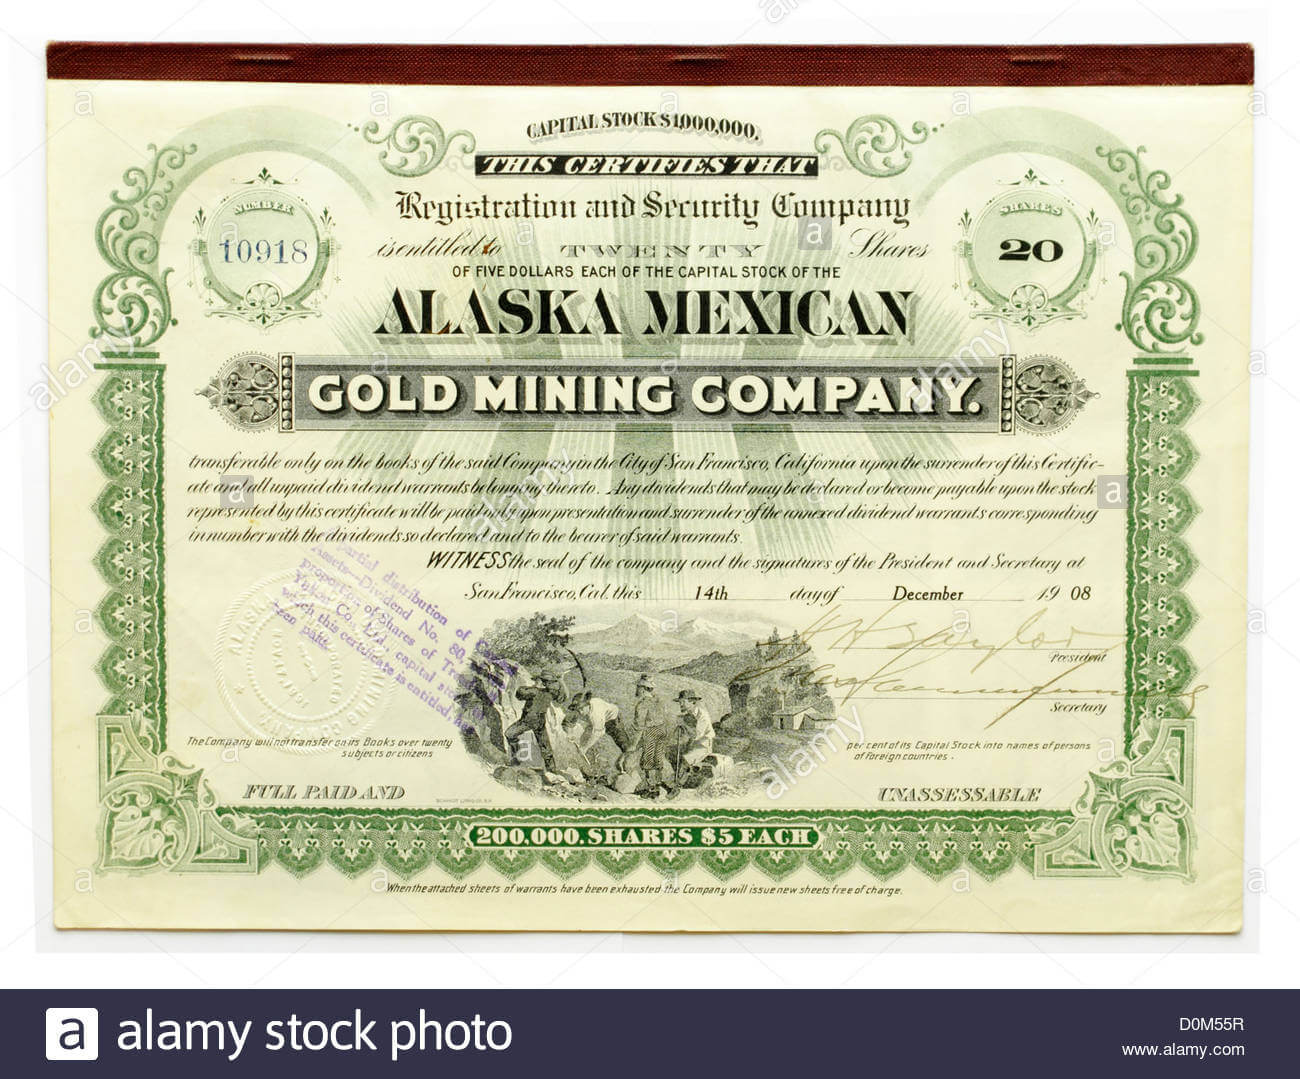 Share Certificate Stock Photos & Share Certificate Stock In Corporate Bond Certificate Template